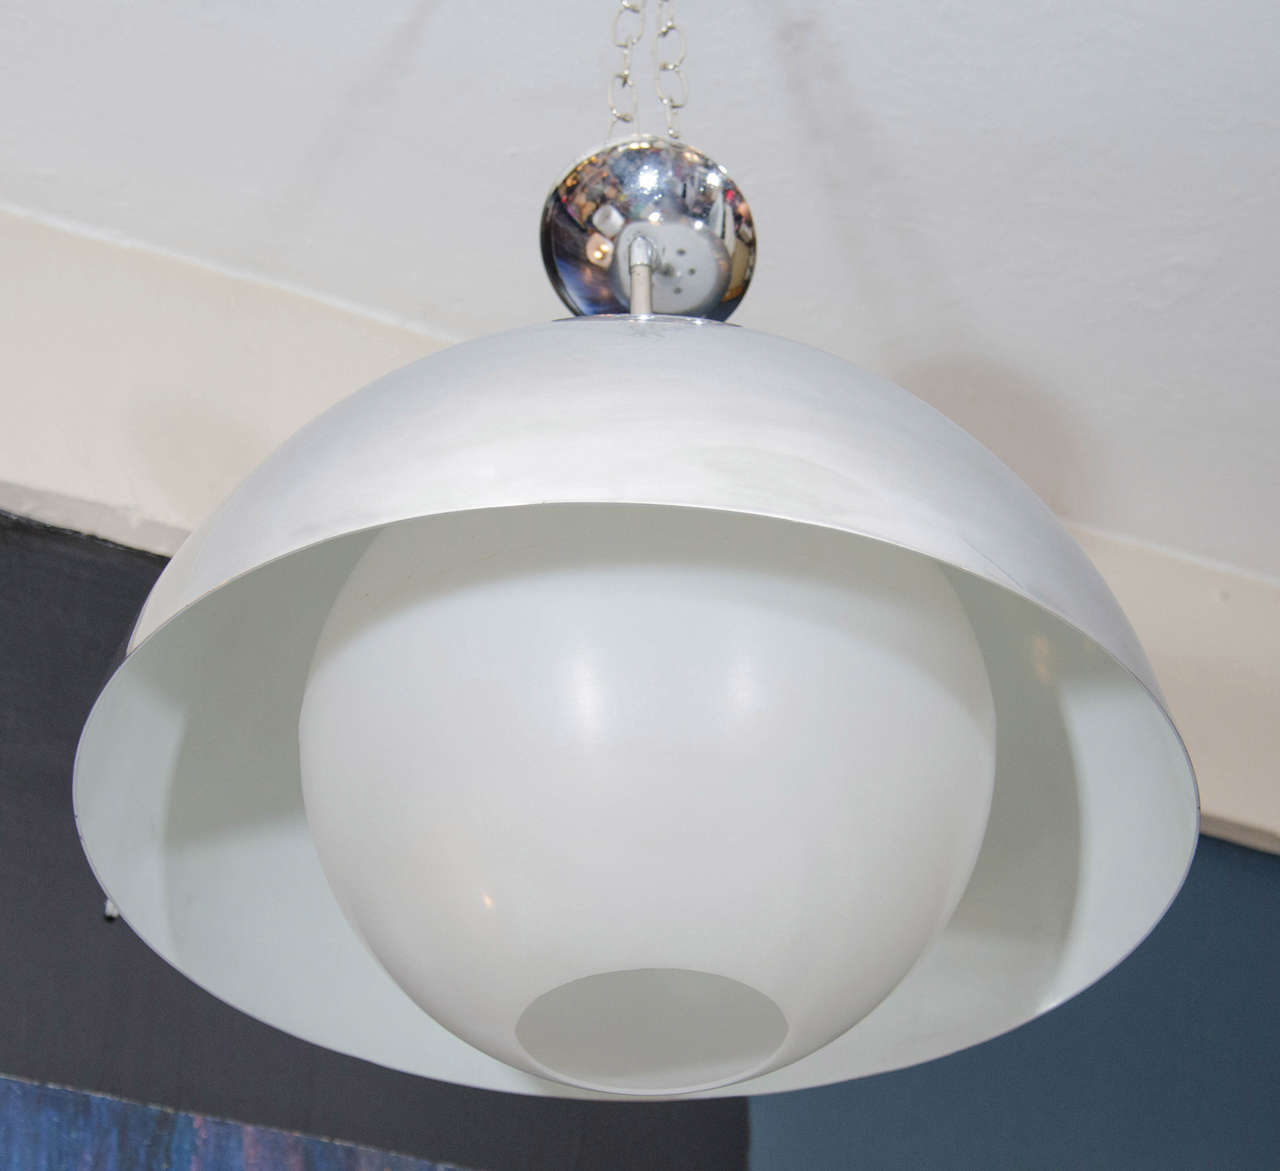 A vintage aluminum dome pendant light by Paul Mayen.

Good vintage condition with age appropriate wear.